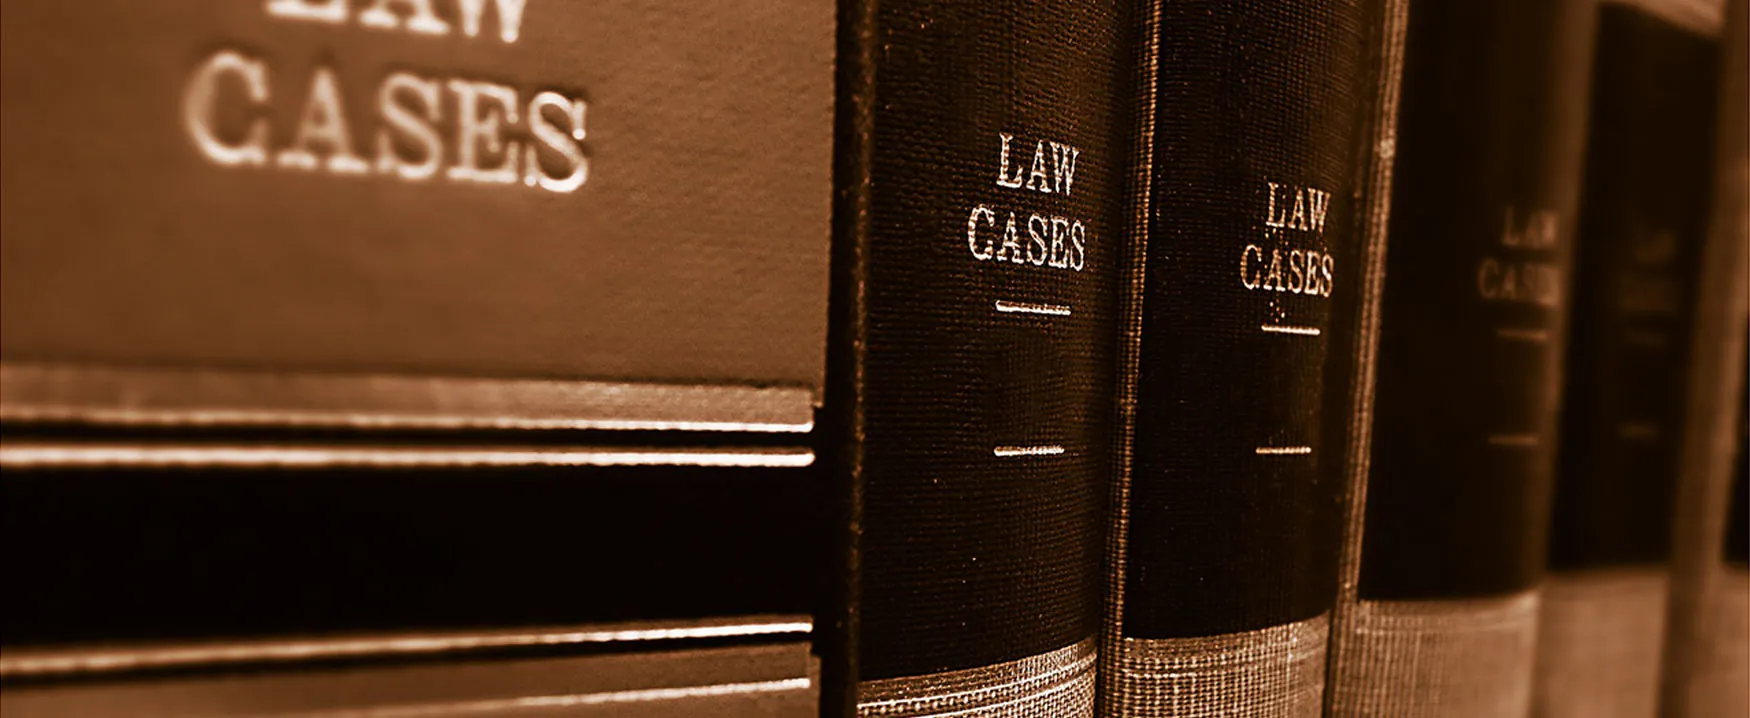 A close-up image of several thick, hard-bound books labeled “Law Cases.”